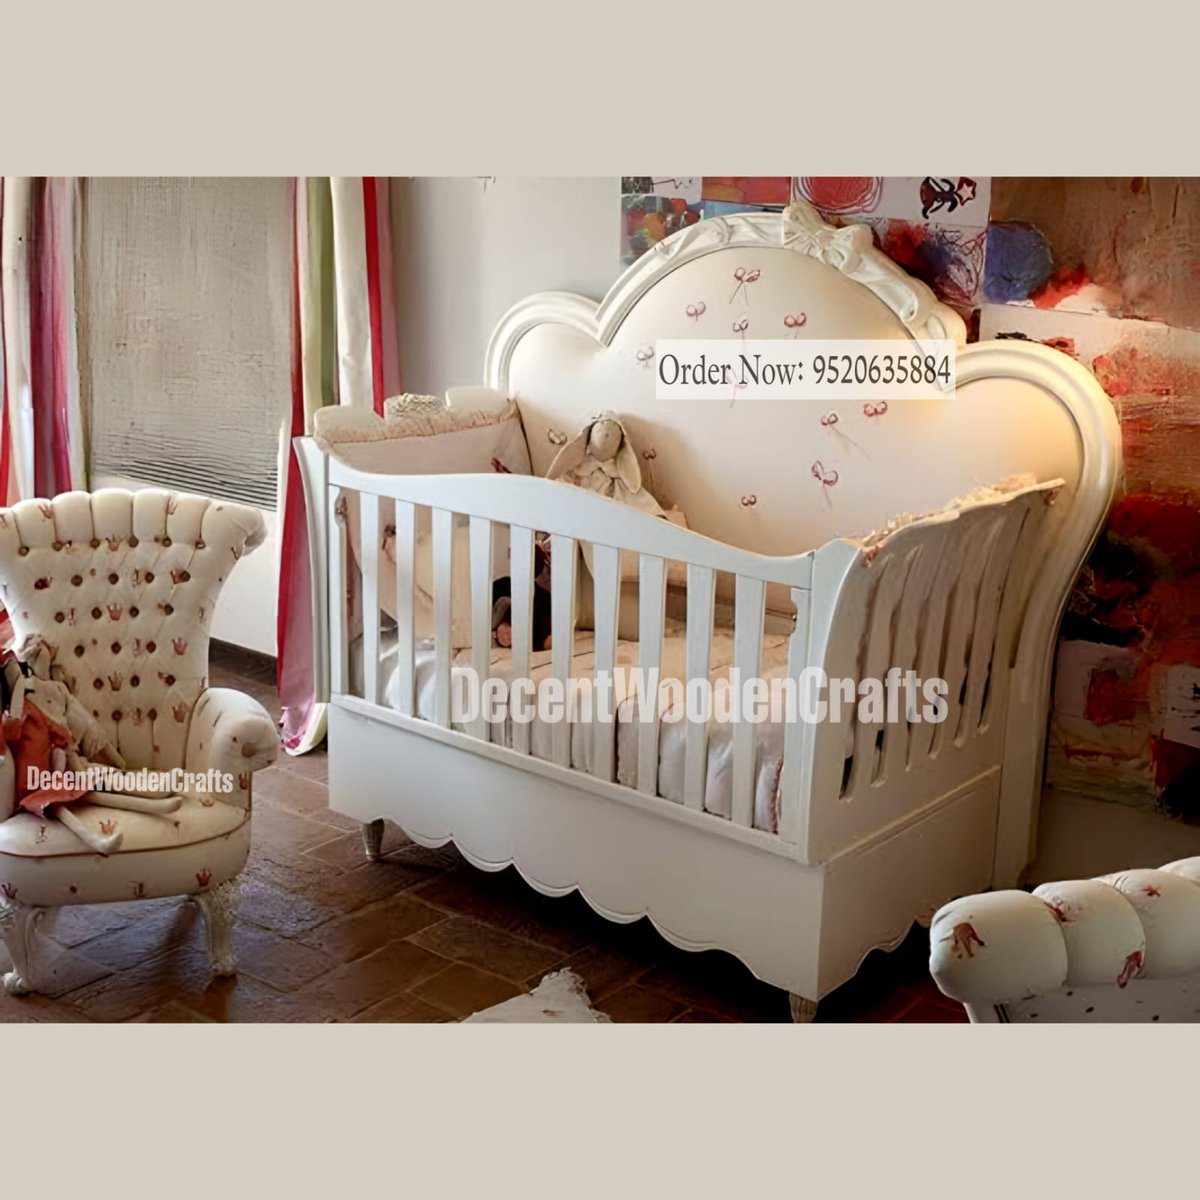 European Baby Bed Neoclassical Solid Wood Carved Baby Bed.
-
Contact #DecentWoodenCrafts to Oder Now!
Call/WhatsApp: +91-9520635884.
-
We're #Specialized in #Customized Designs.
-
#RoyalBabyRooms #RoyalBabies #BabyBedroom #BabyRoomDecor #BedroomDecor #BabyBedroom #BedroomDecor